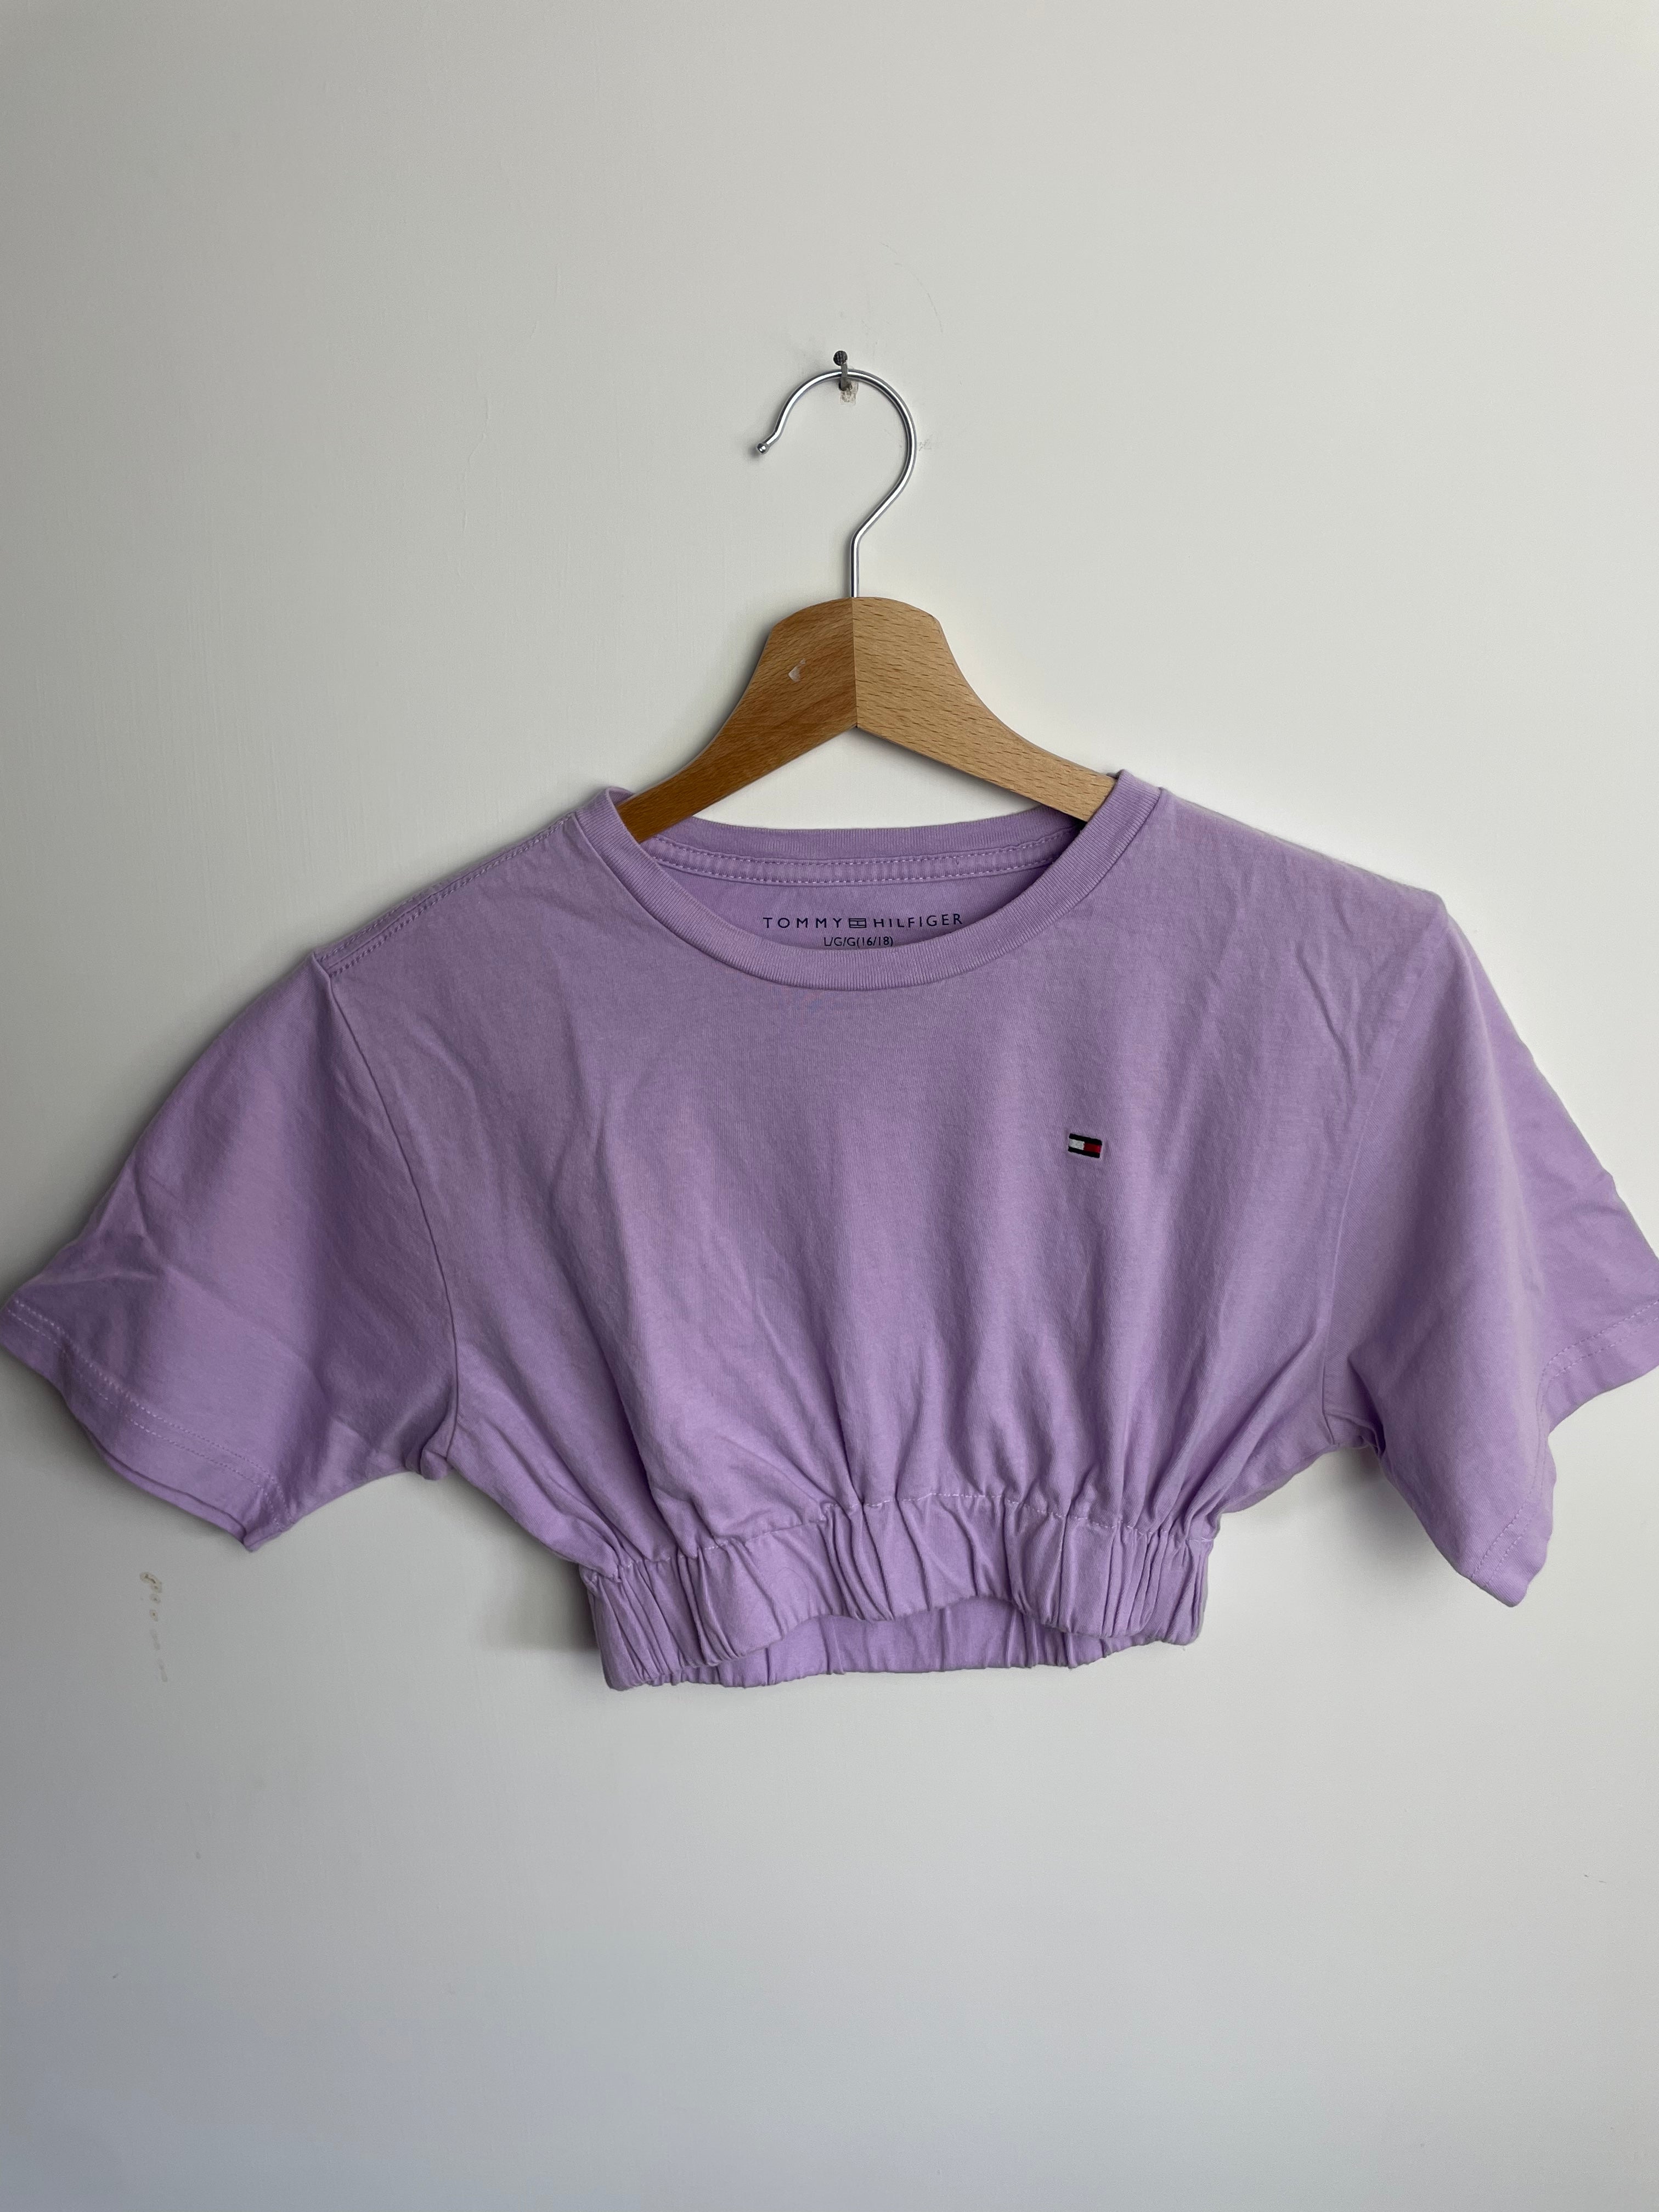 Tommy Hilfiger Lilac Crop Top - One Size